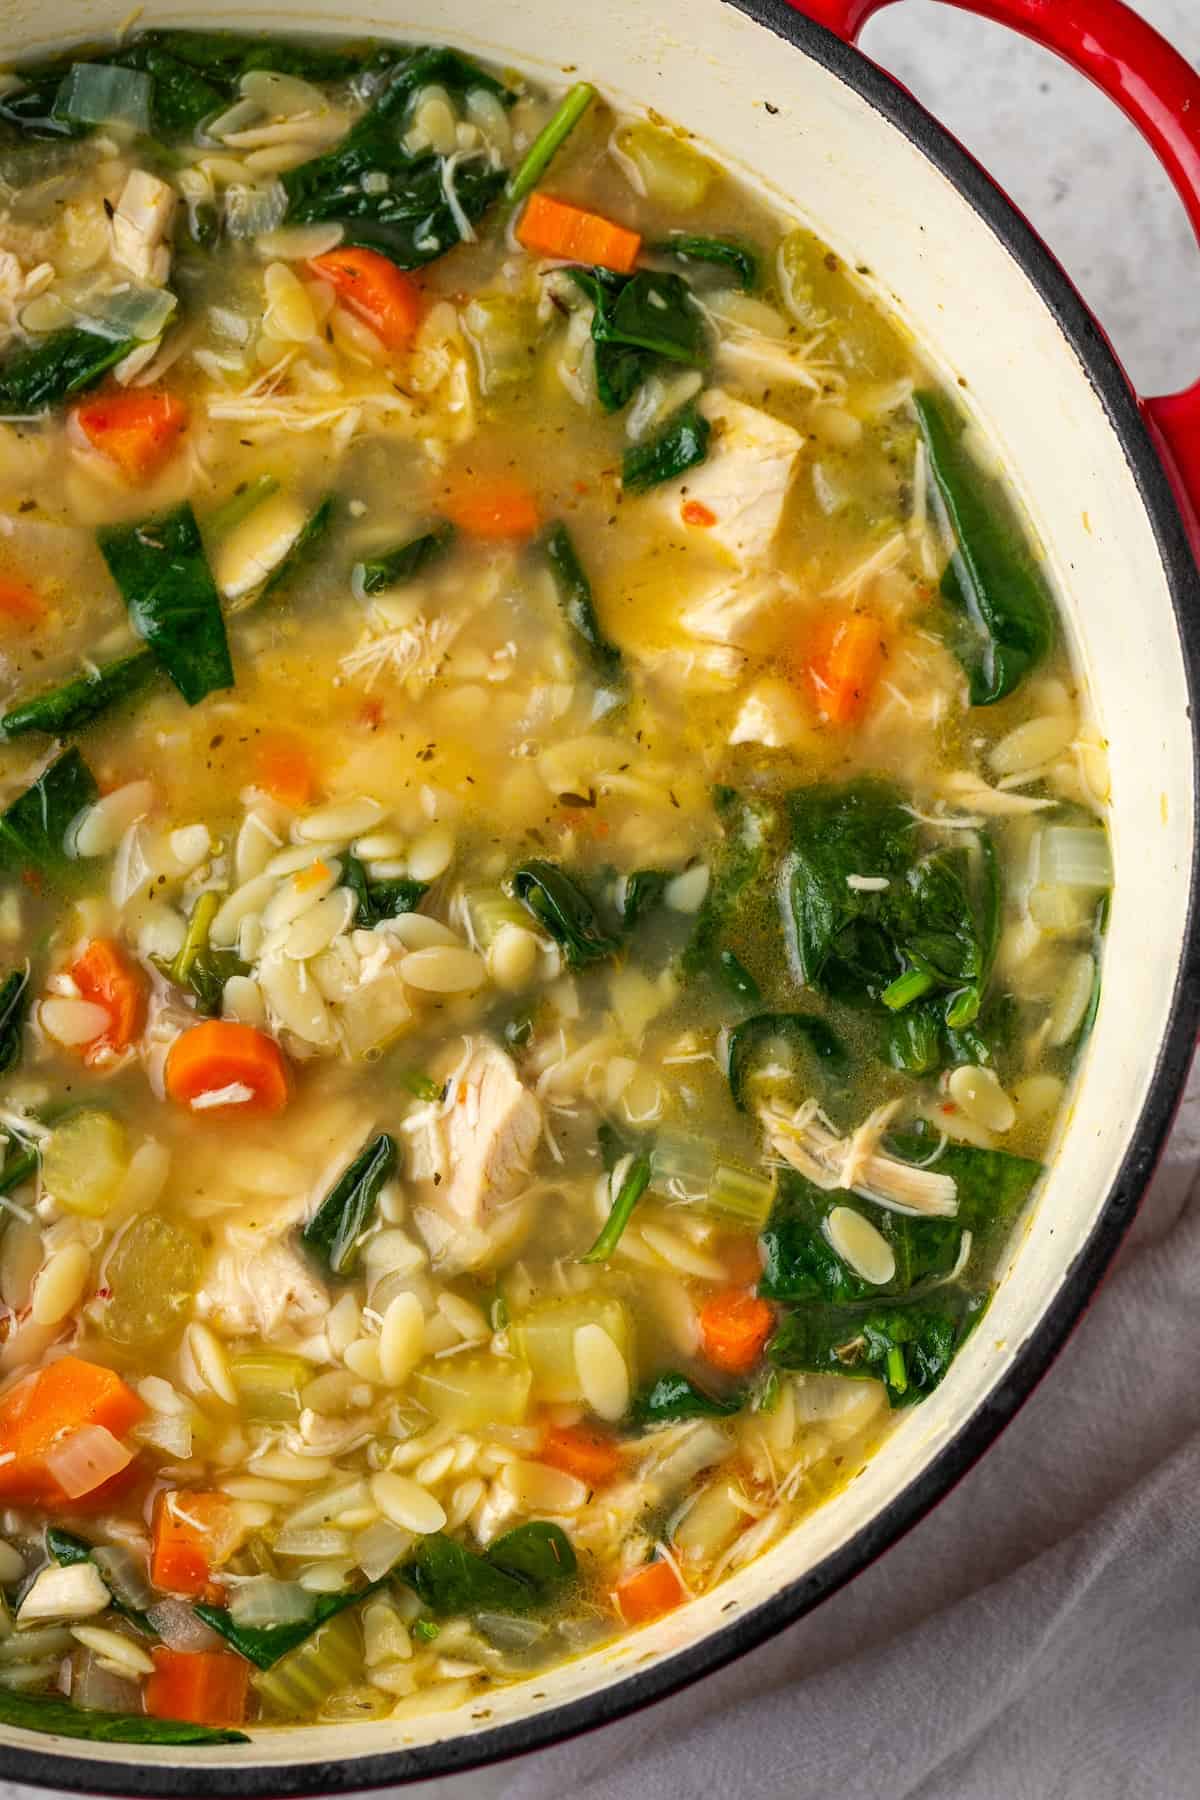 Chicken soup with orzo pasta, spinach and carrots in a large red soup pot.